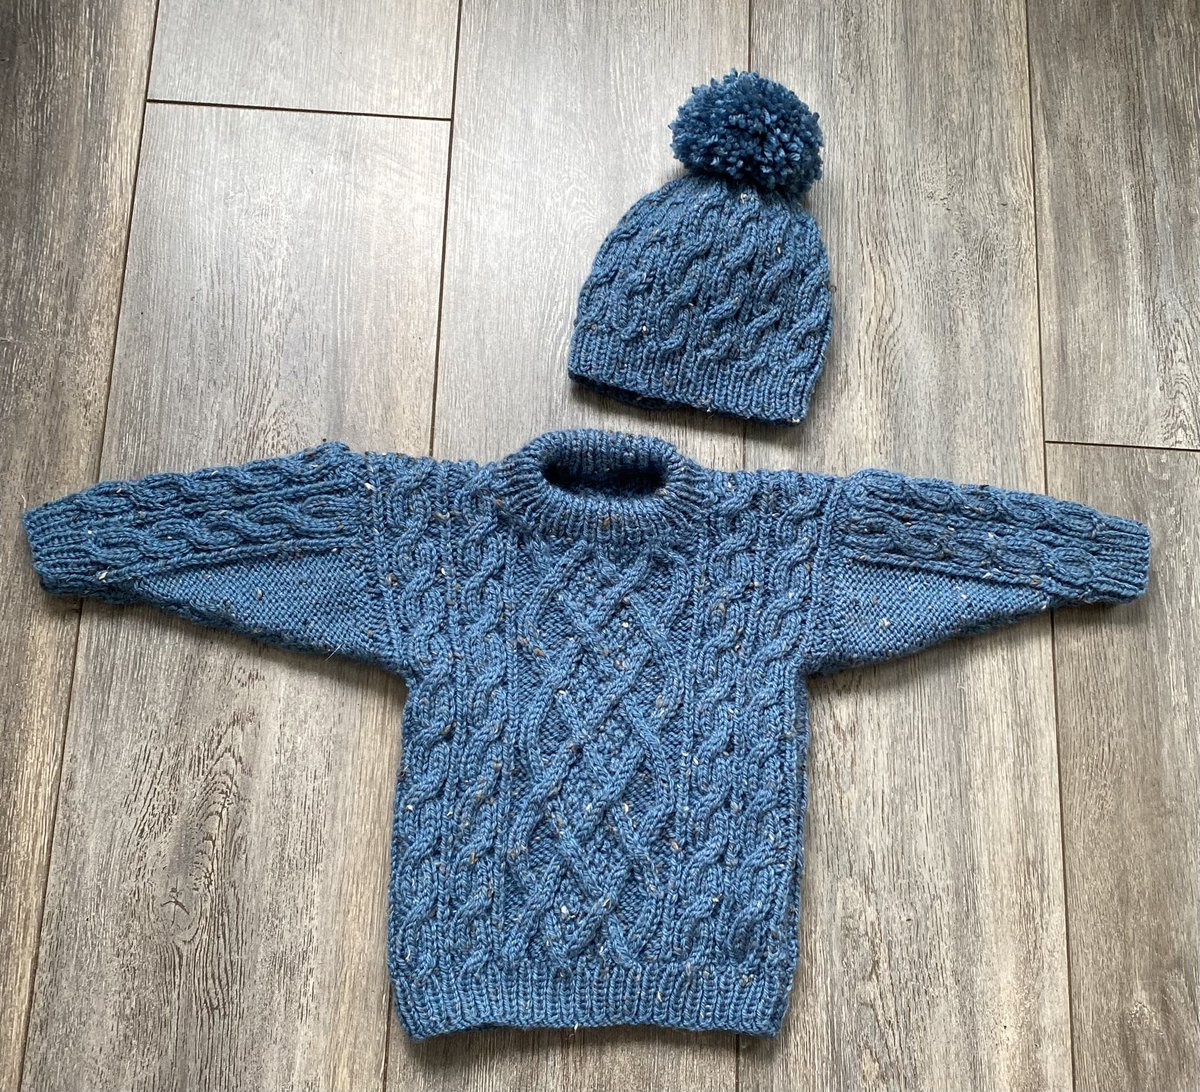 etsy.com/uk/listing/172… Listed today - boys hand knitted cable pattern jumper with matching Beanie hat - fits age 1-2 years #MHHSBD #firstmaster #CraftBizParty #ATSocialMedia #UKHashtags